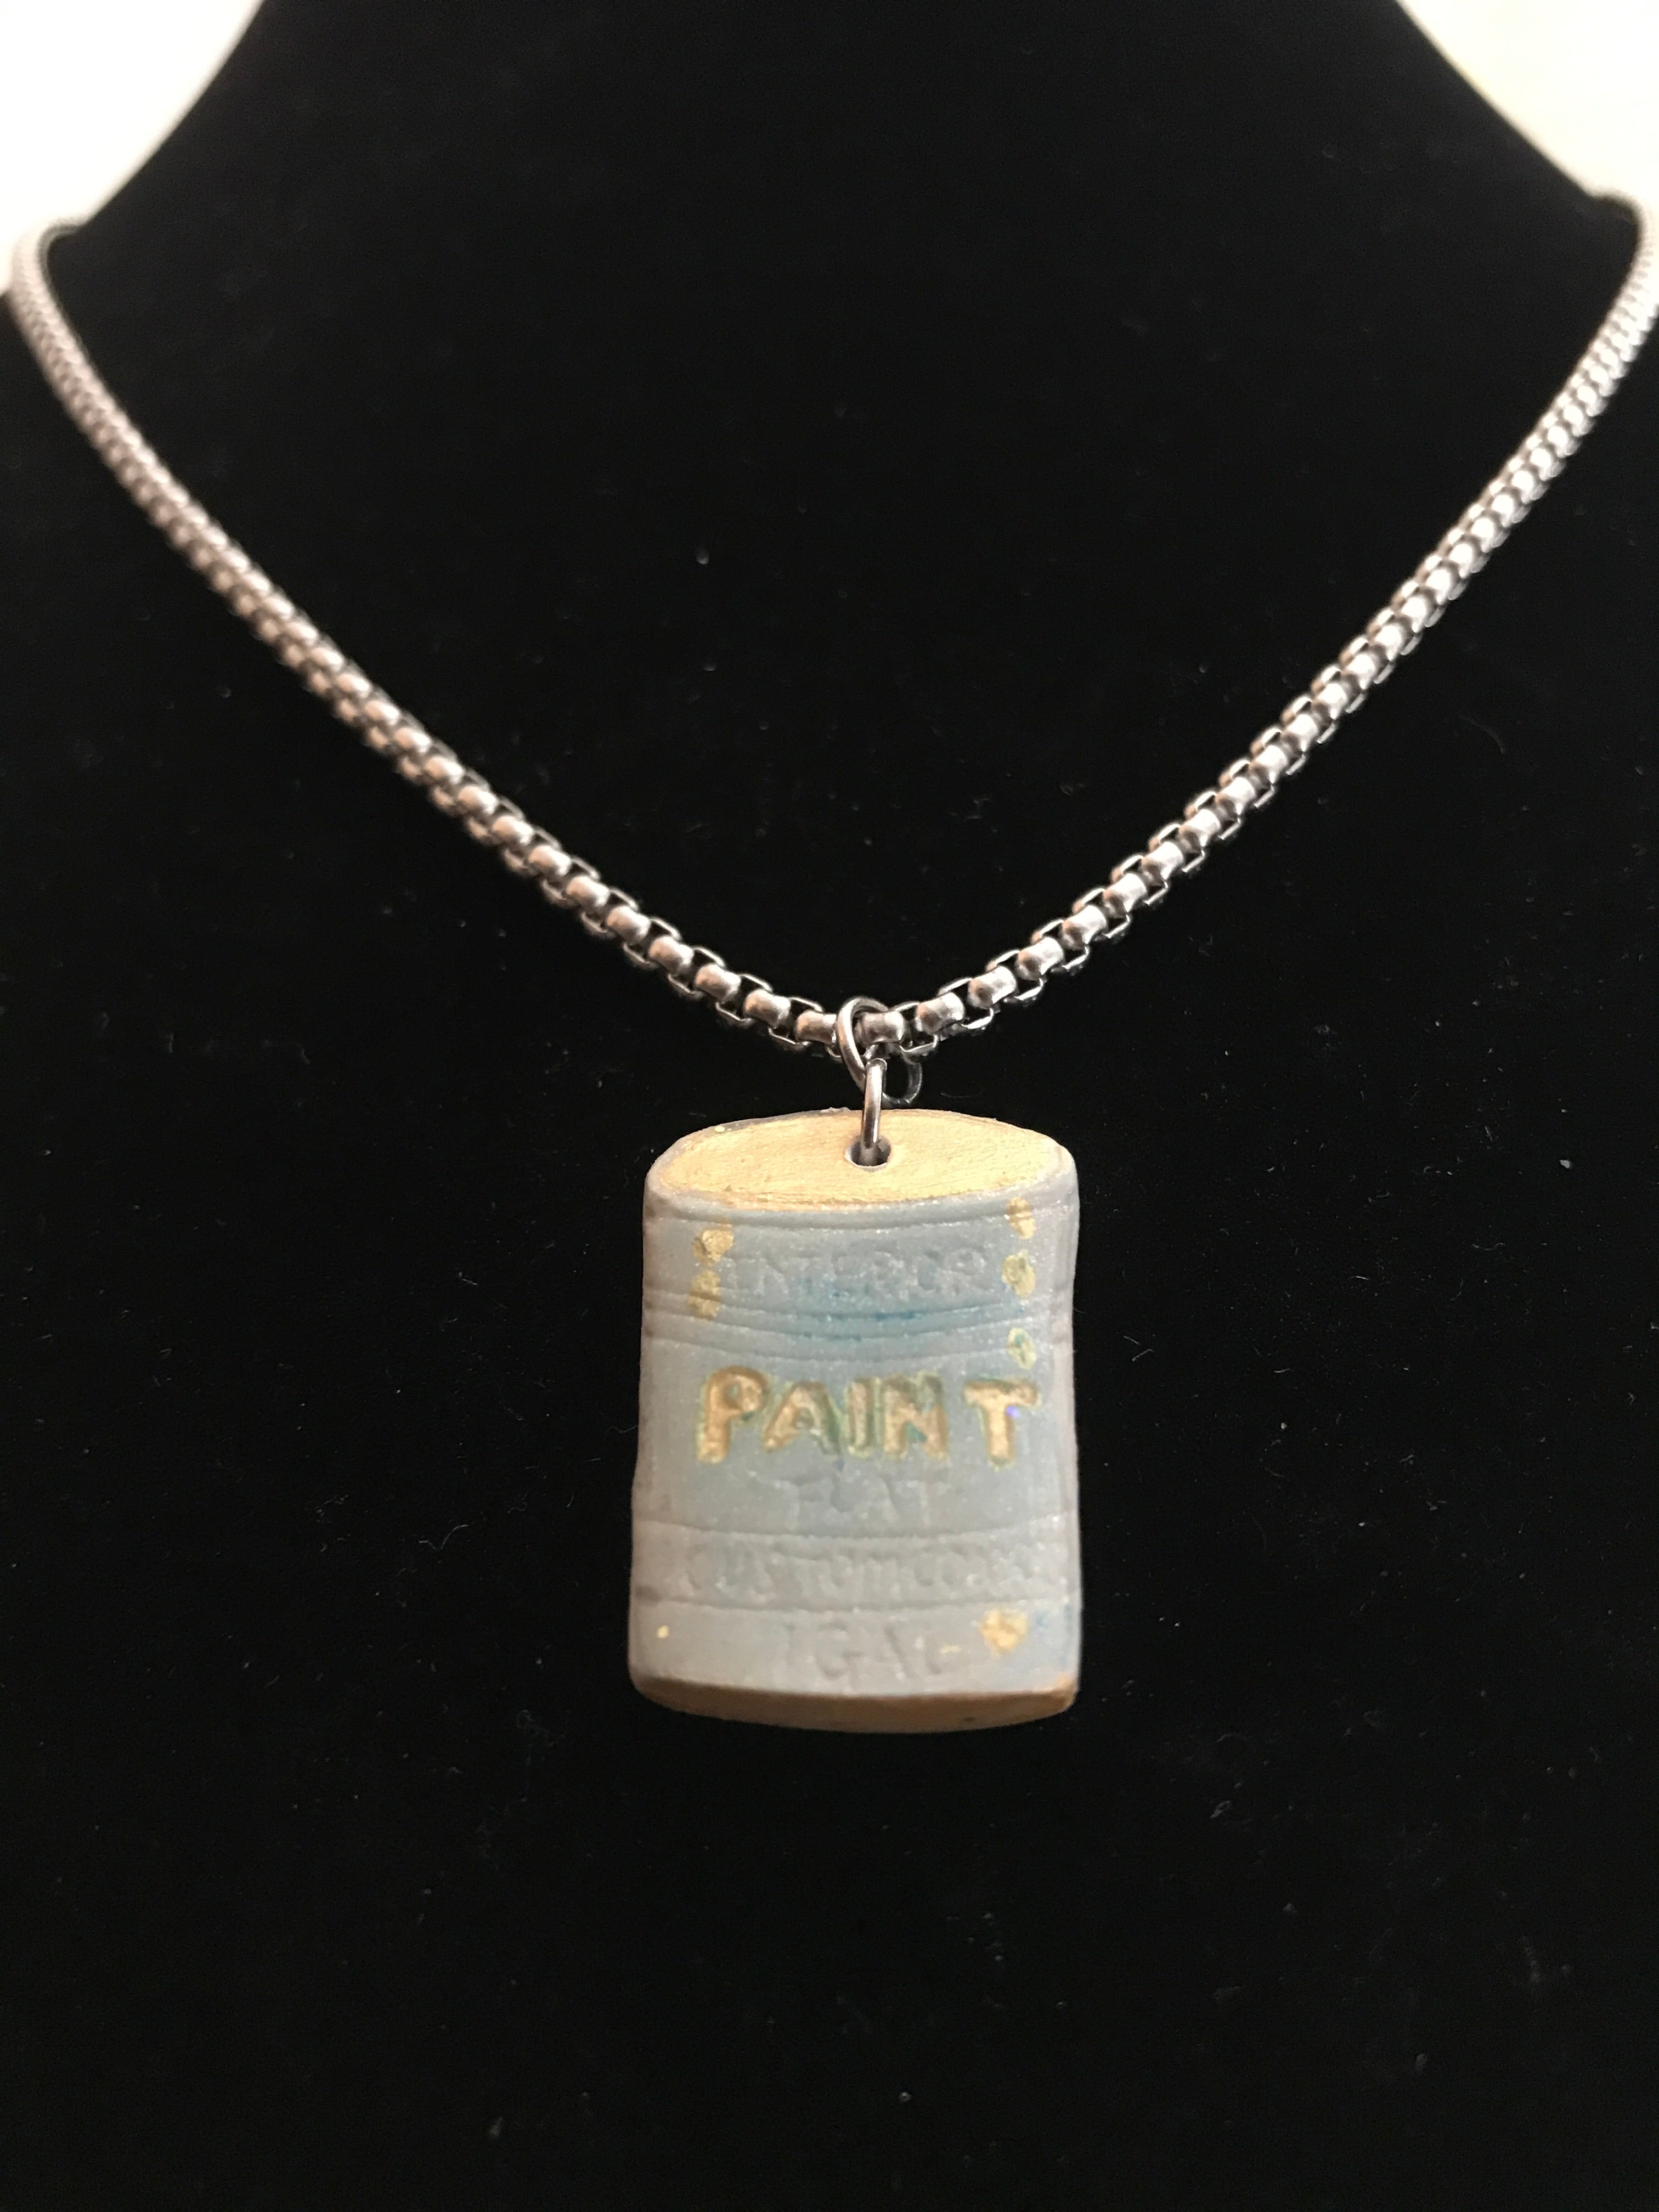 Painted paint can necklace